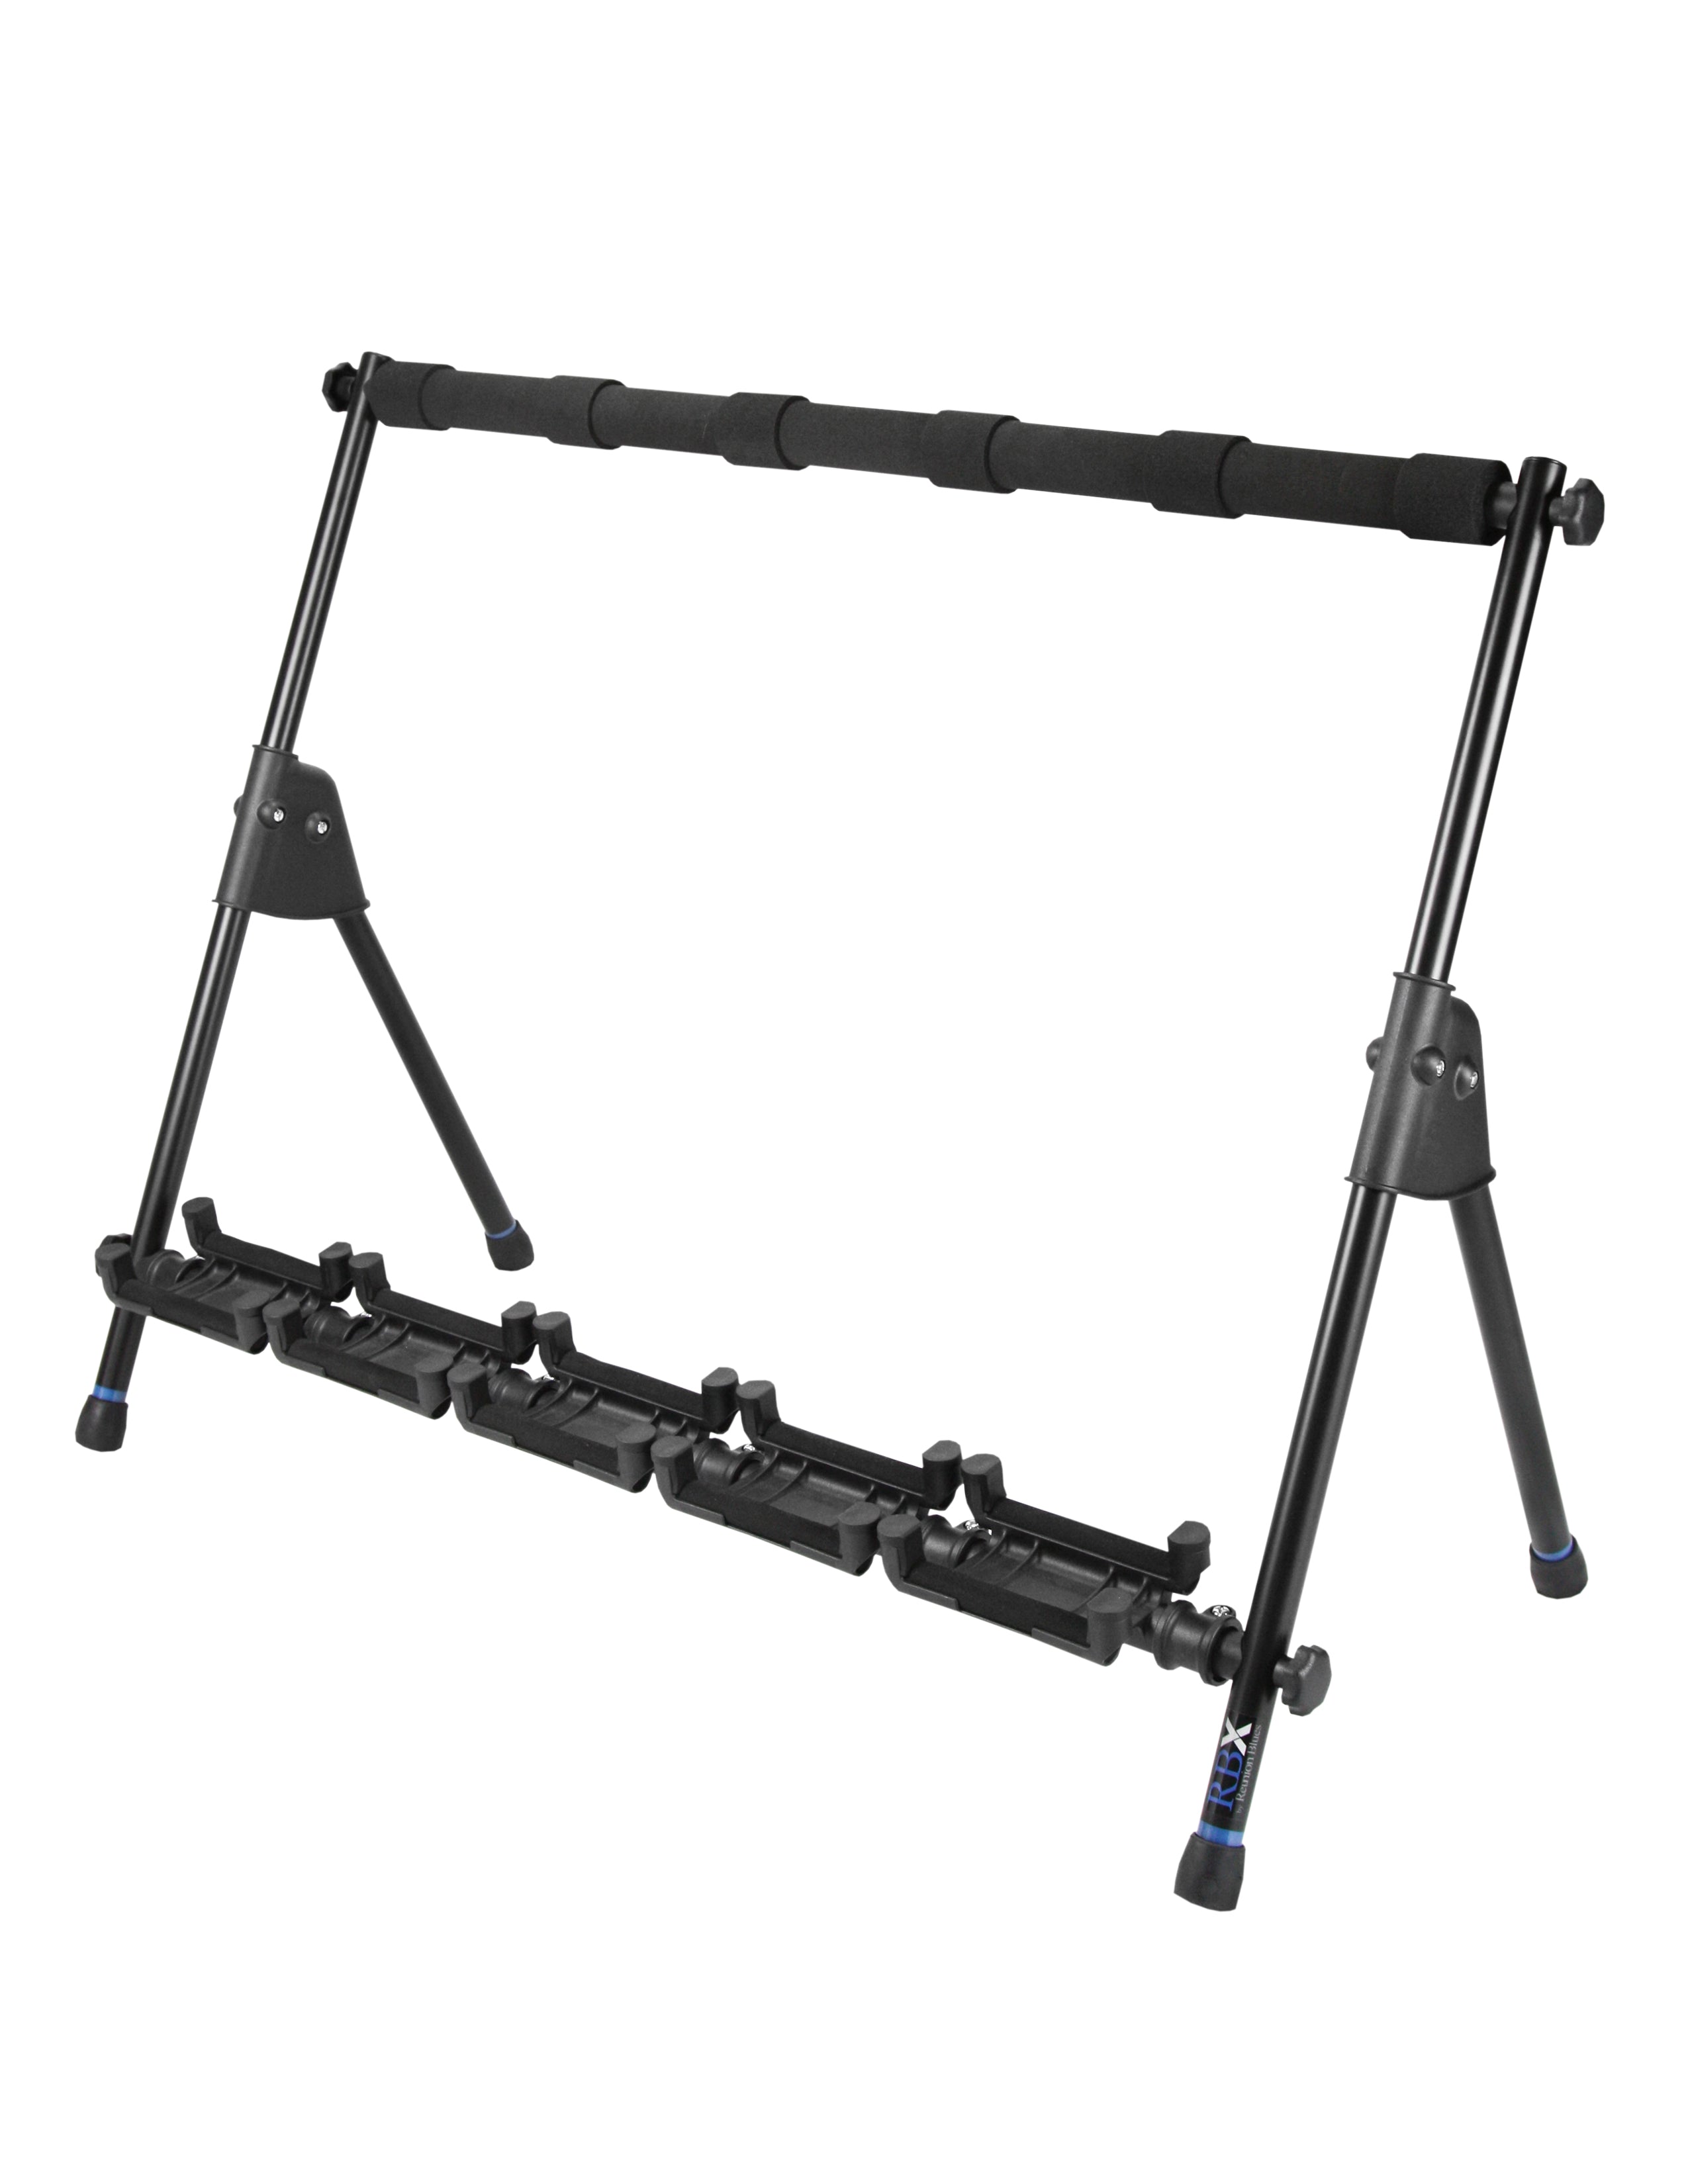 GS50 R5 GUITAR STAND - FOR 5 GUITARS